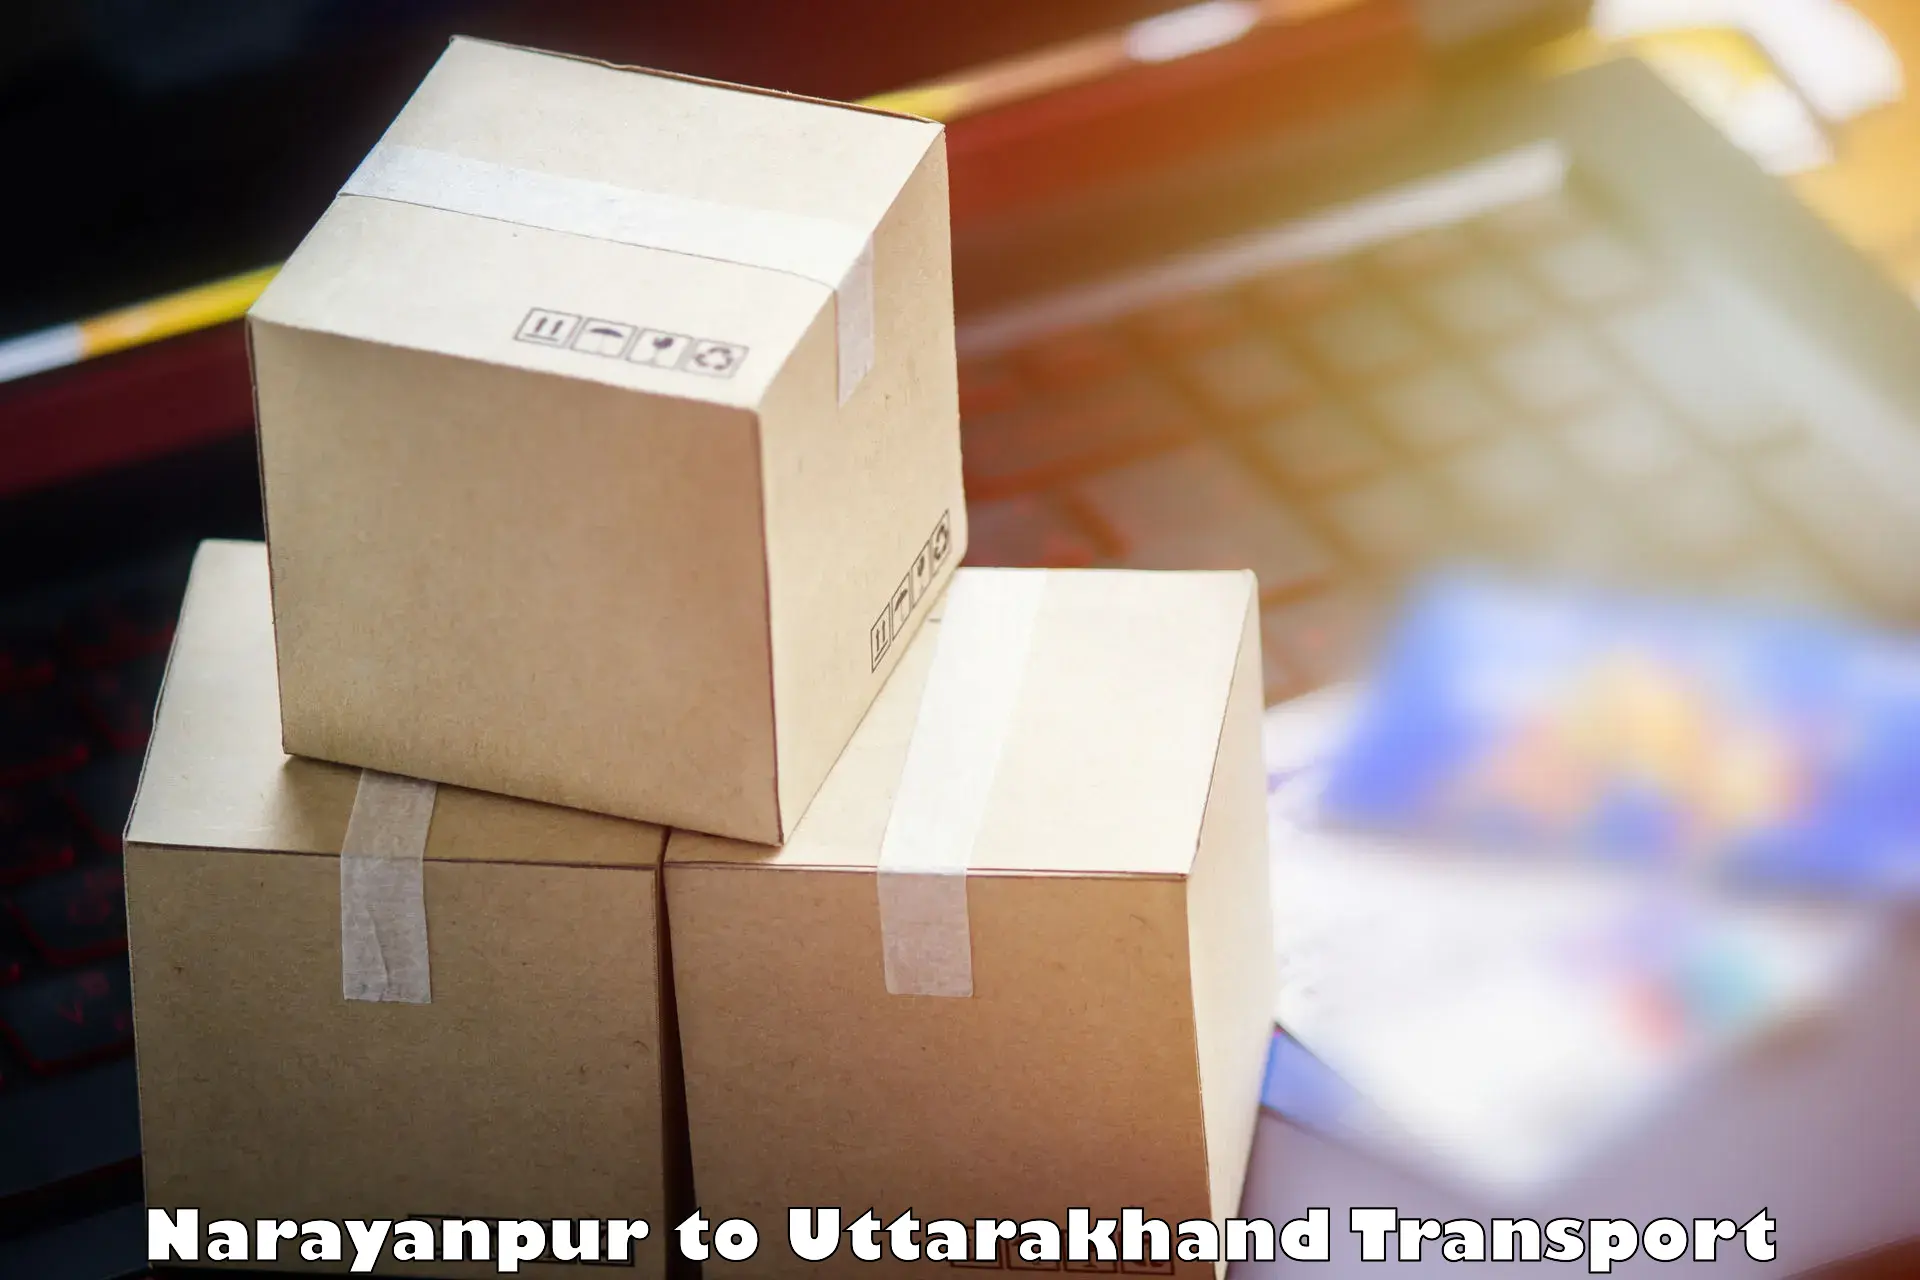 Commercial transport service Narayanpur to Rudrapur